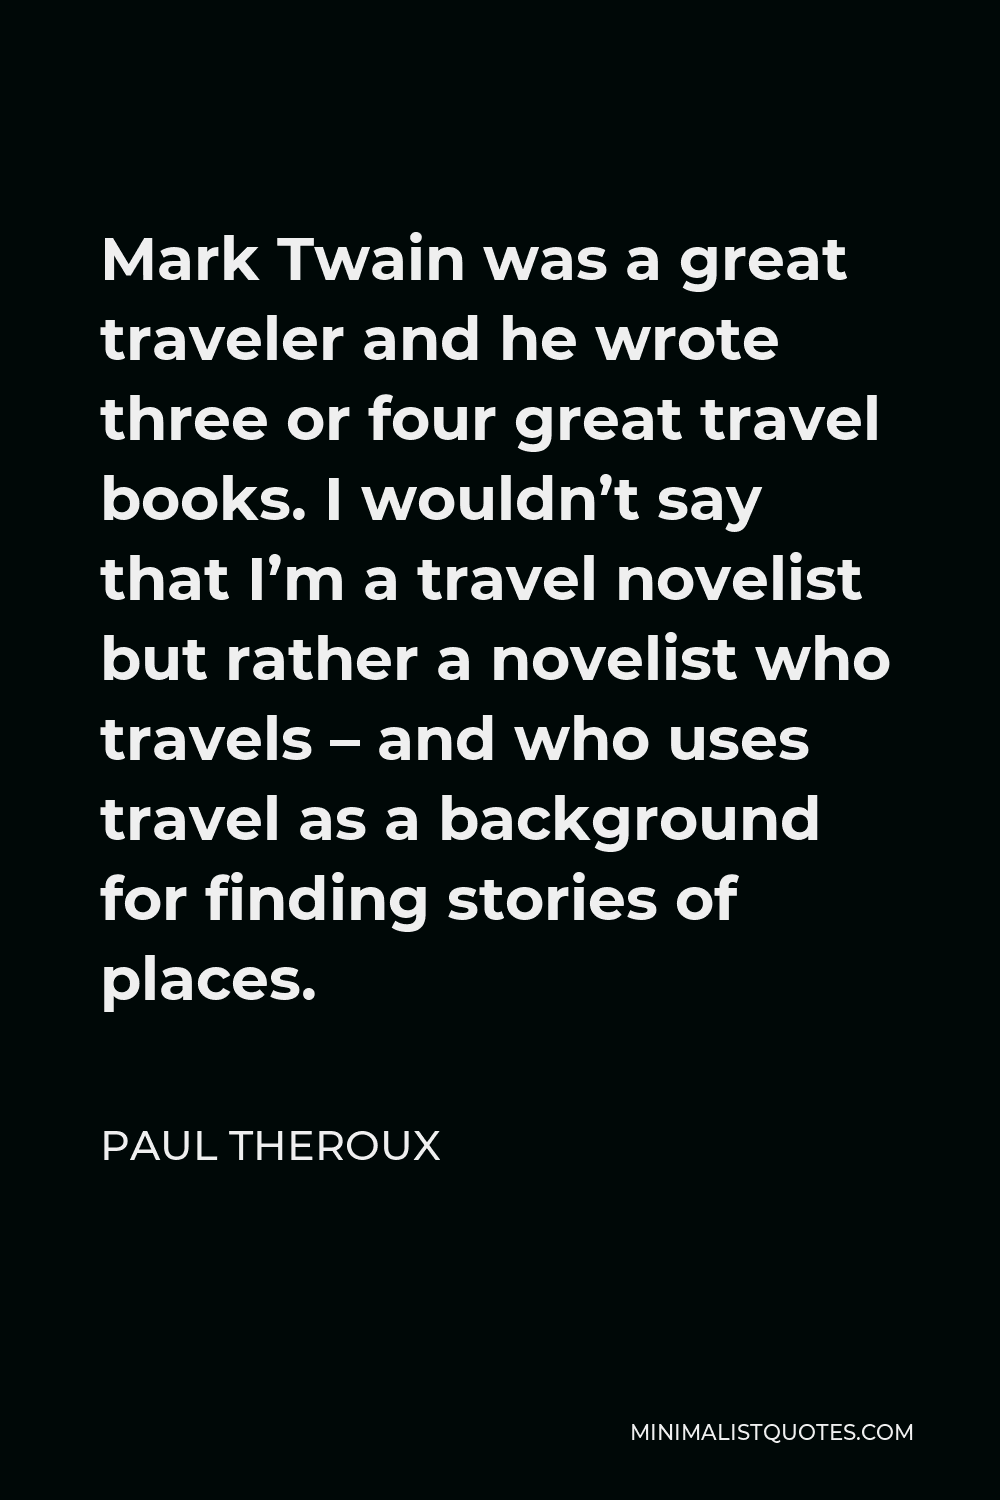 Paul Theroux Quote - Mark Twain was a great traveler and he wrote three or four great travel books. I wouldn’t say that I’m a travel novelist but rather a novelist who travels – and who uses travel as a background for finding stories of places.